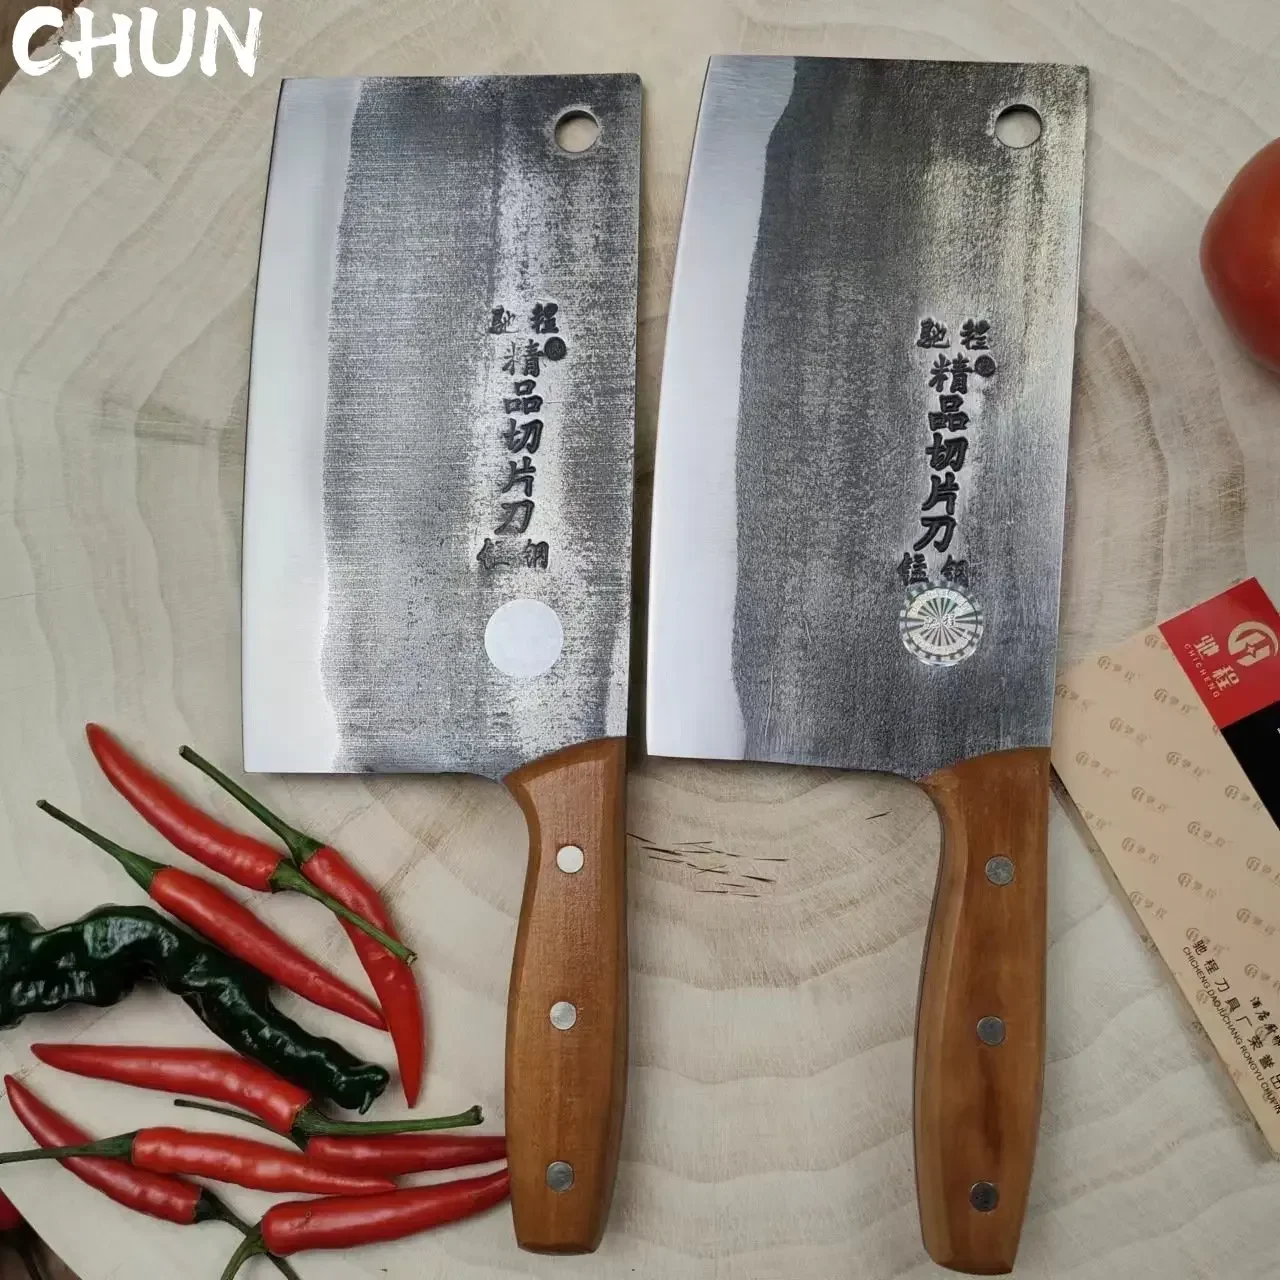 https://ae01.alicdn.com/kf/S26c048dae6ba4d6985fa7c8451506426O/Retro-Handmade-Forged-Kitchen-Knife-High-Carbon-Steel-Slicing-Meat-Vegetable-Knife-4mm-Thick-Blade-Cooking.jpg